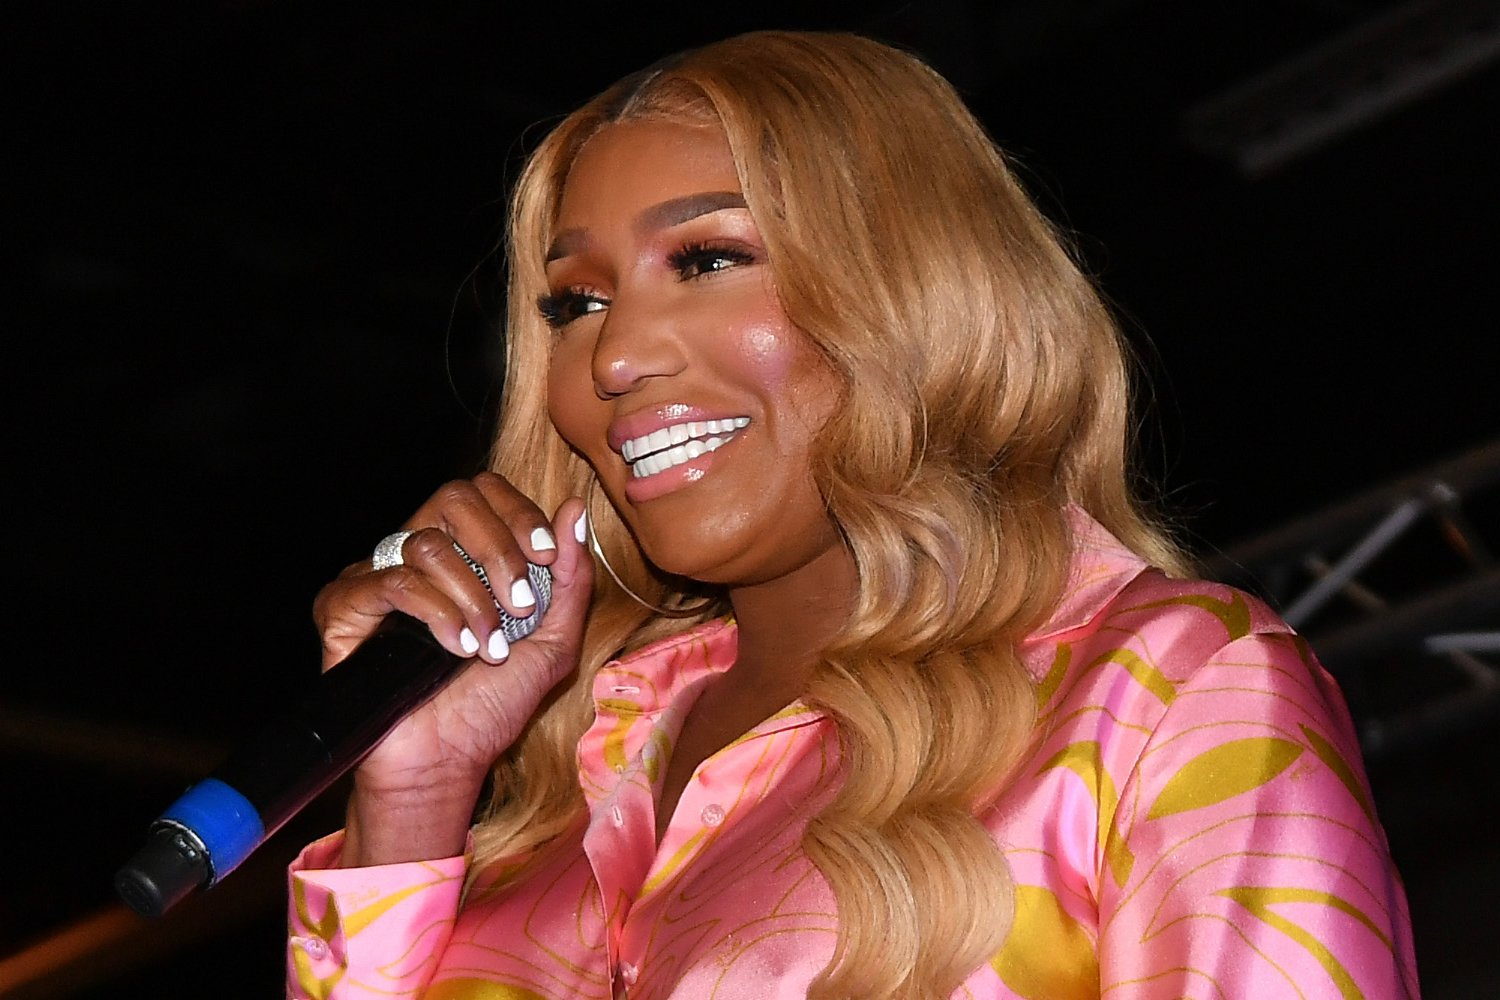 ‘Celebrity Big Brother’: Nene Leakes Reacts to Rumors She’s Joining CBS Reality Show